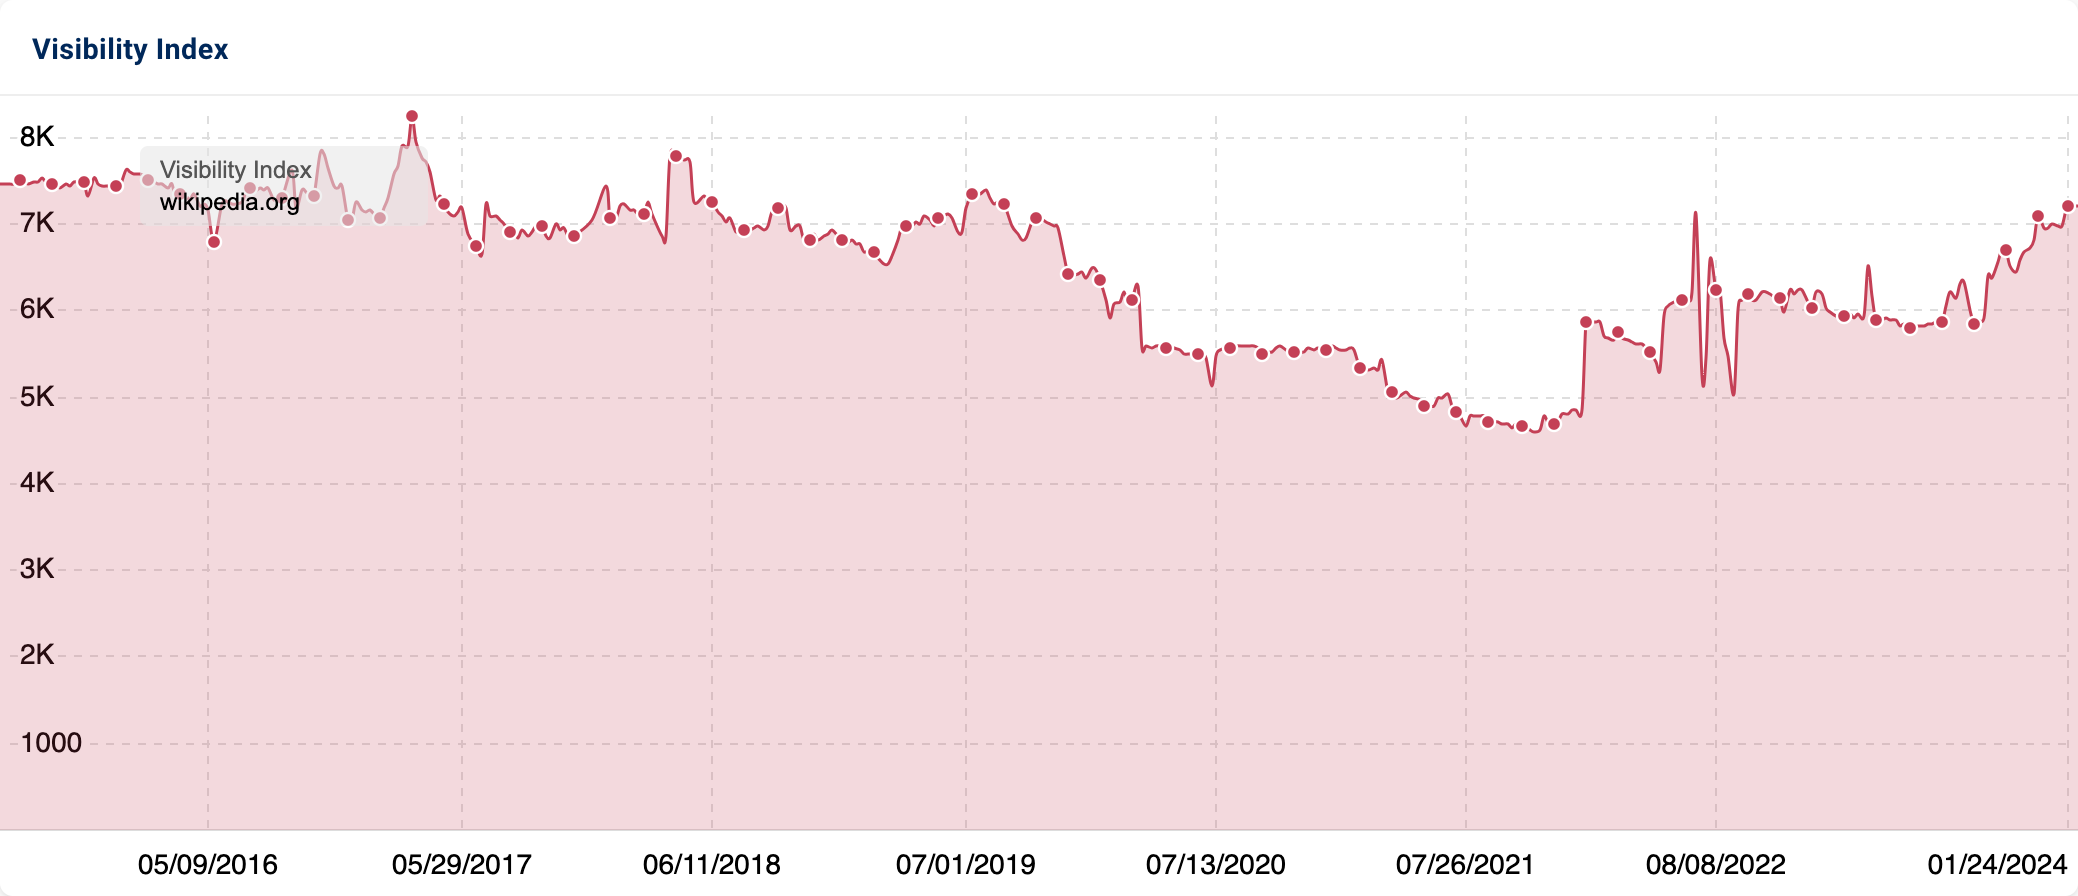 The full Visibility Index history of wikipedia.org.